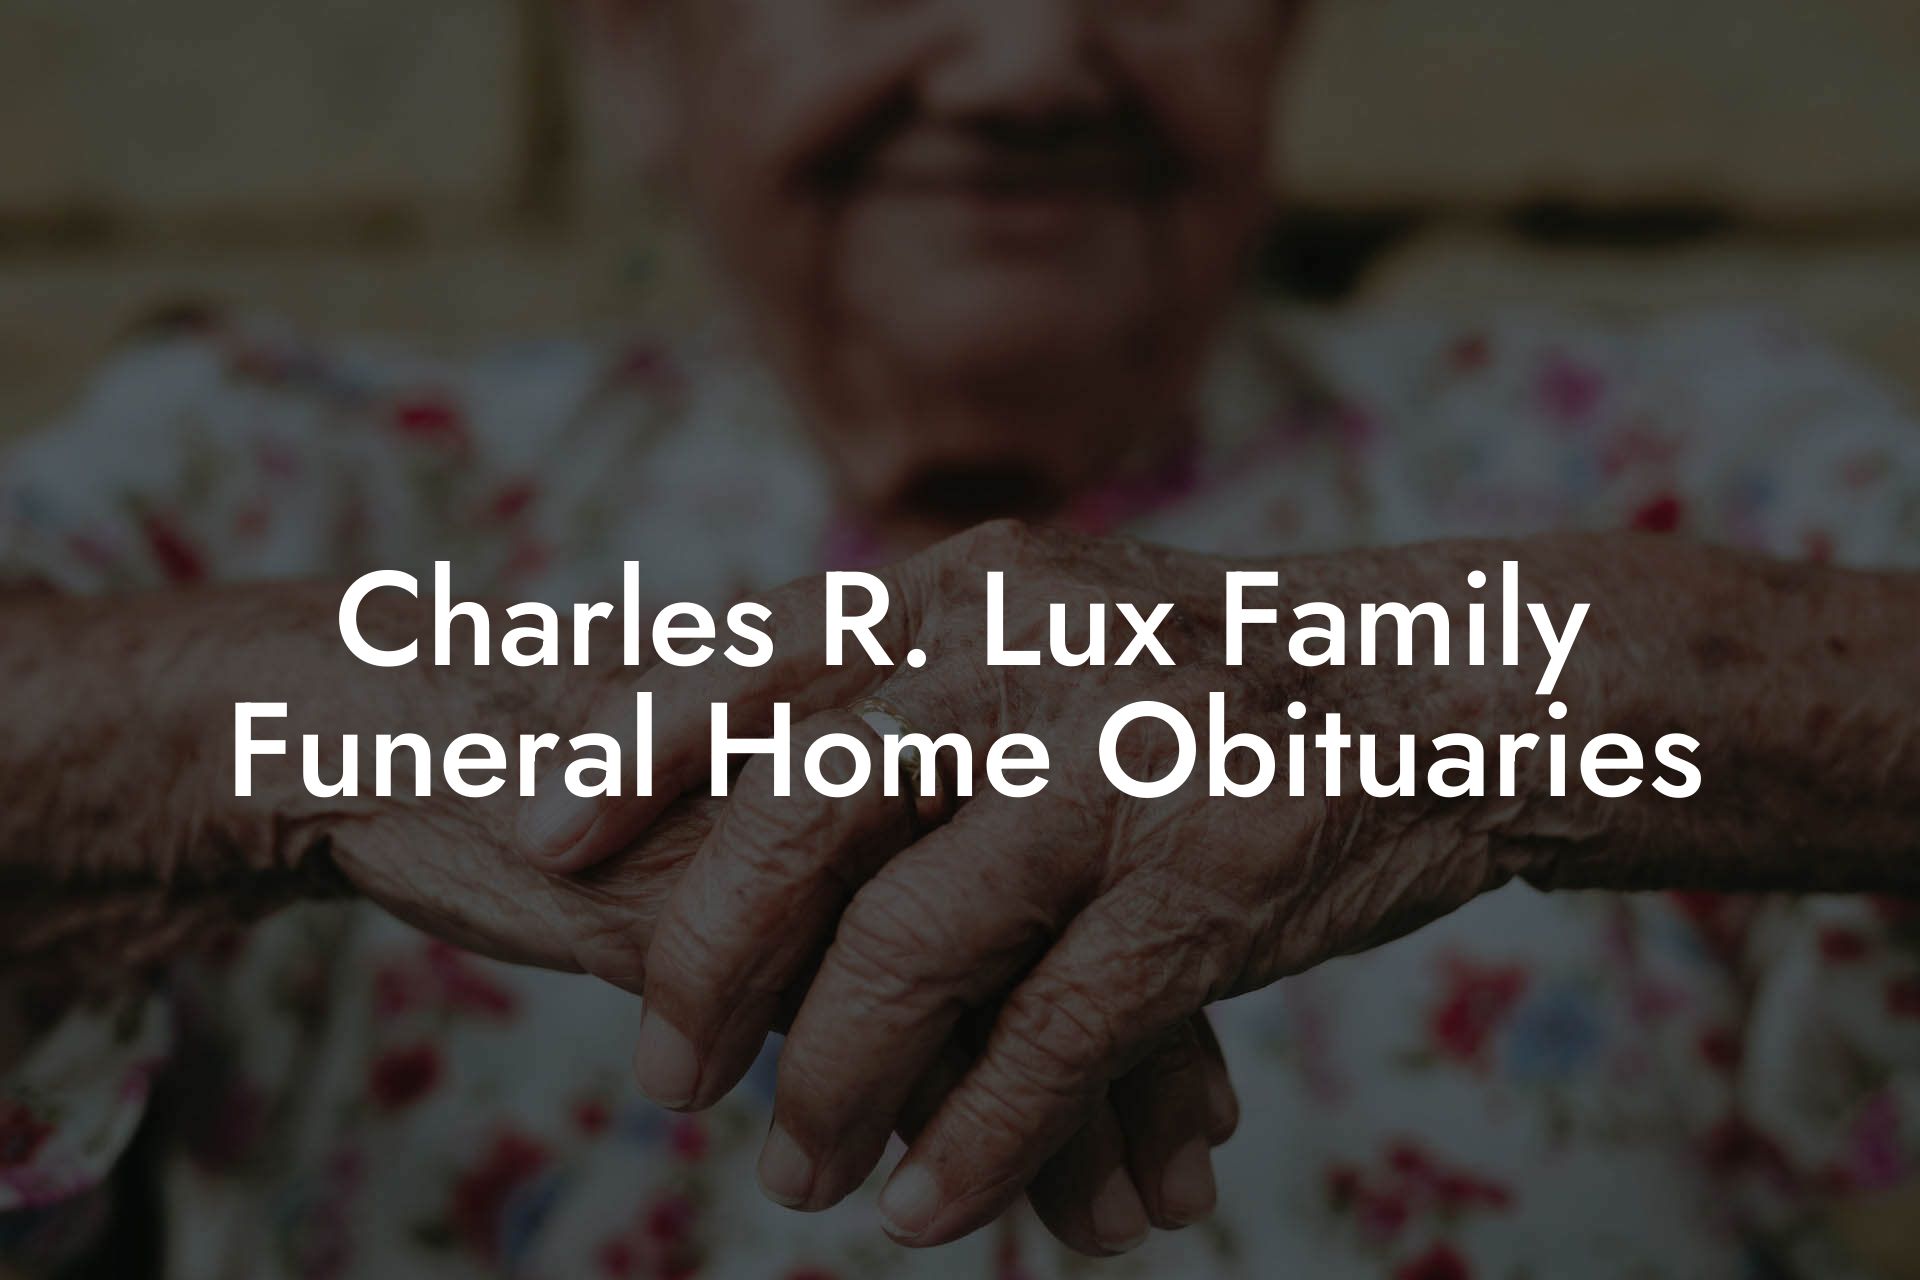 Charles R. Lux Family Funeral Home Obituaries